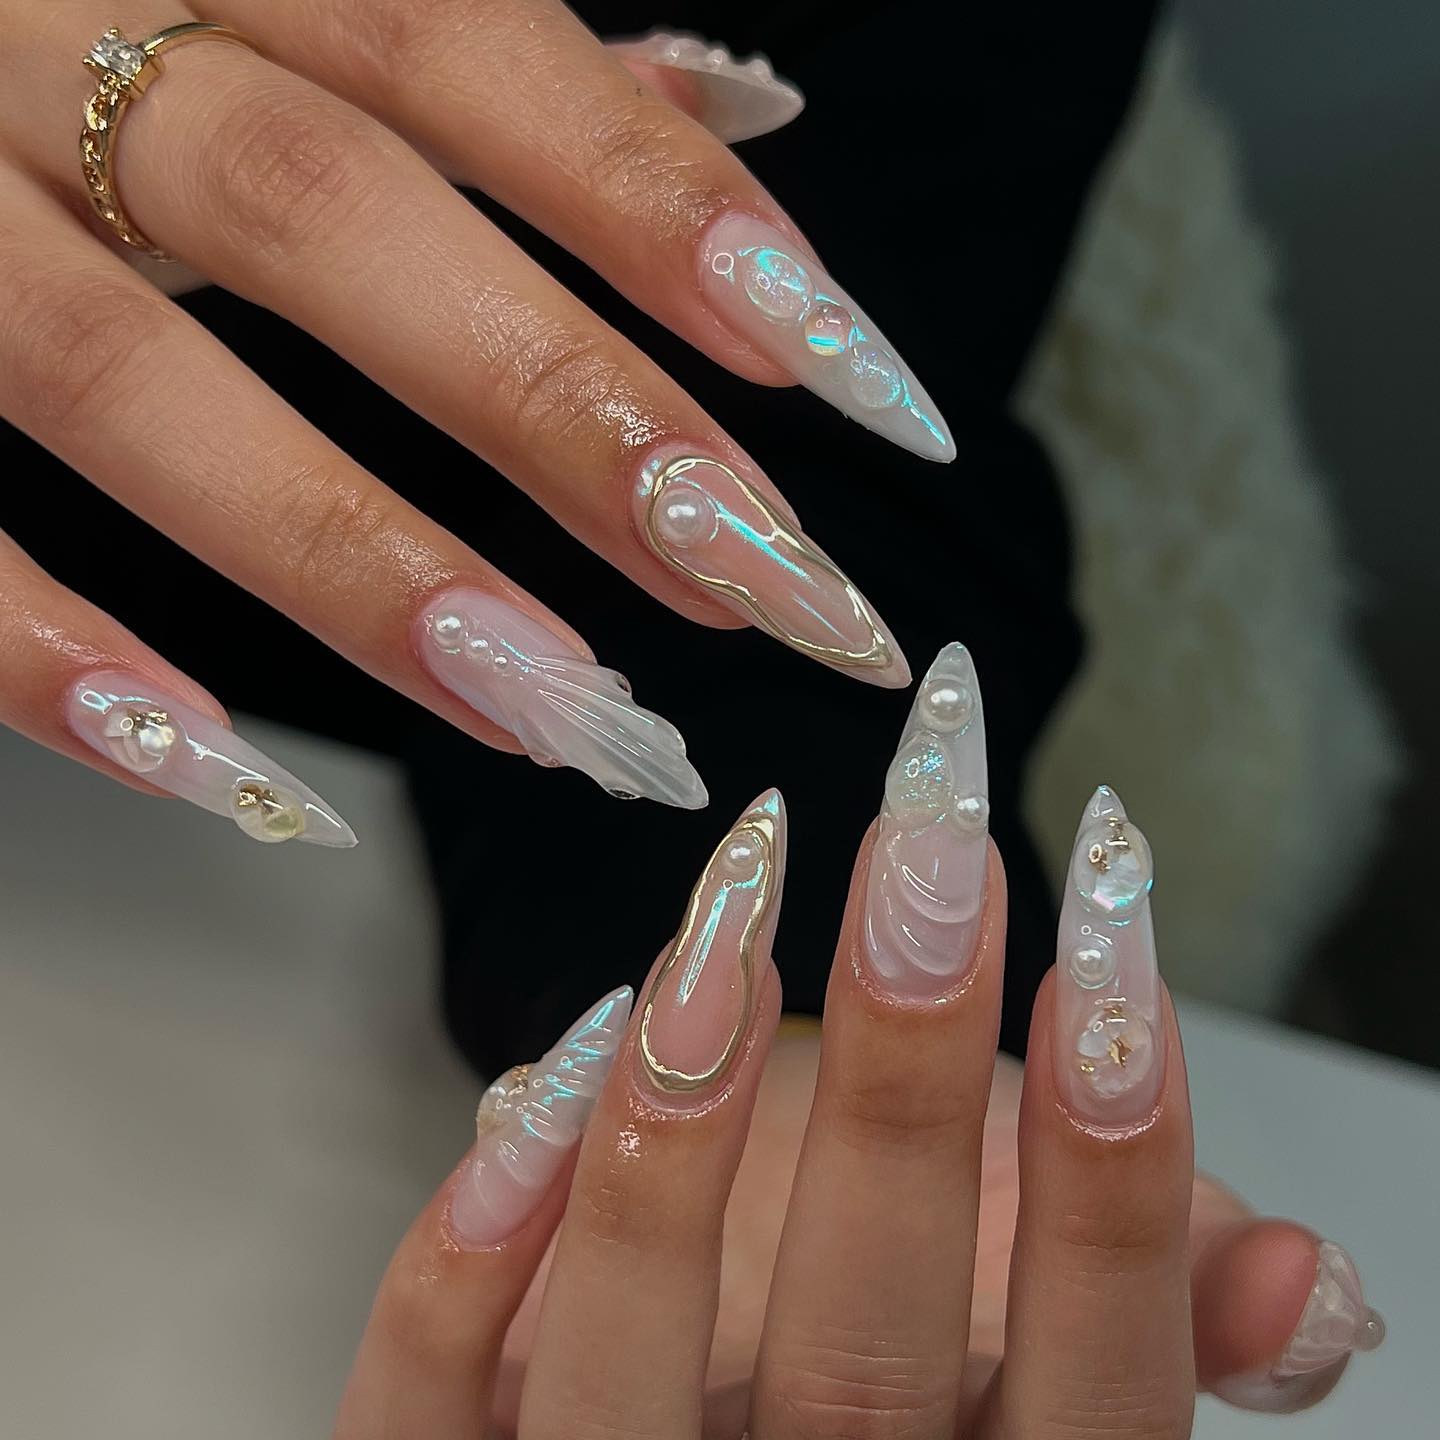 Mermaid Nails Are In – Here's How To Get The Look